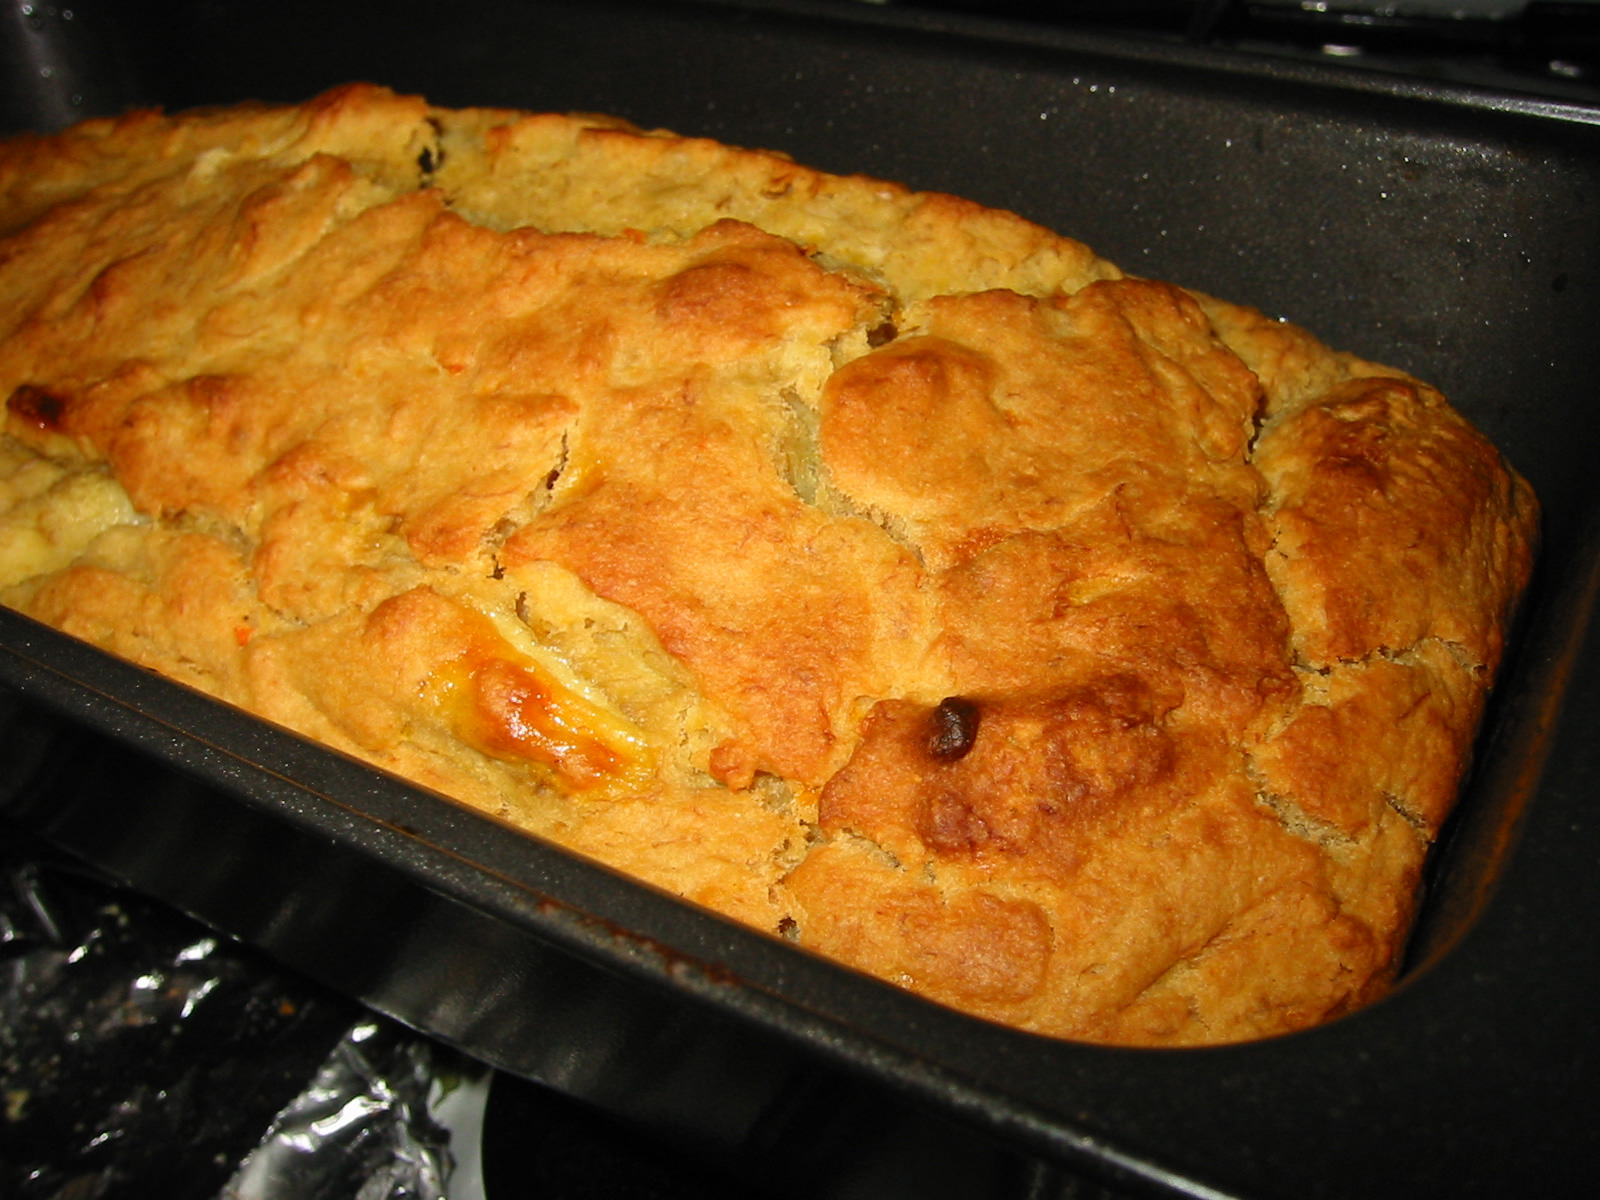 Banana loaf fresh out of the oven